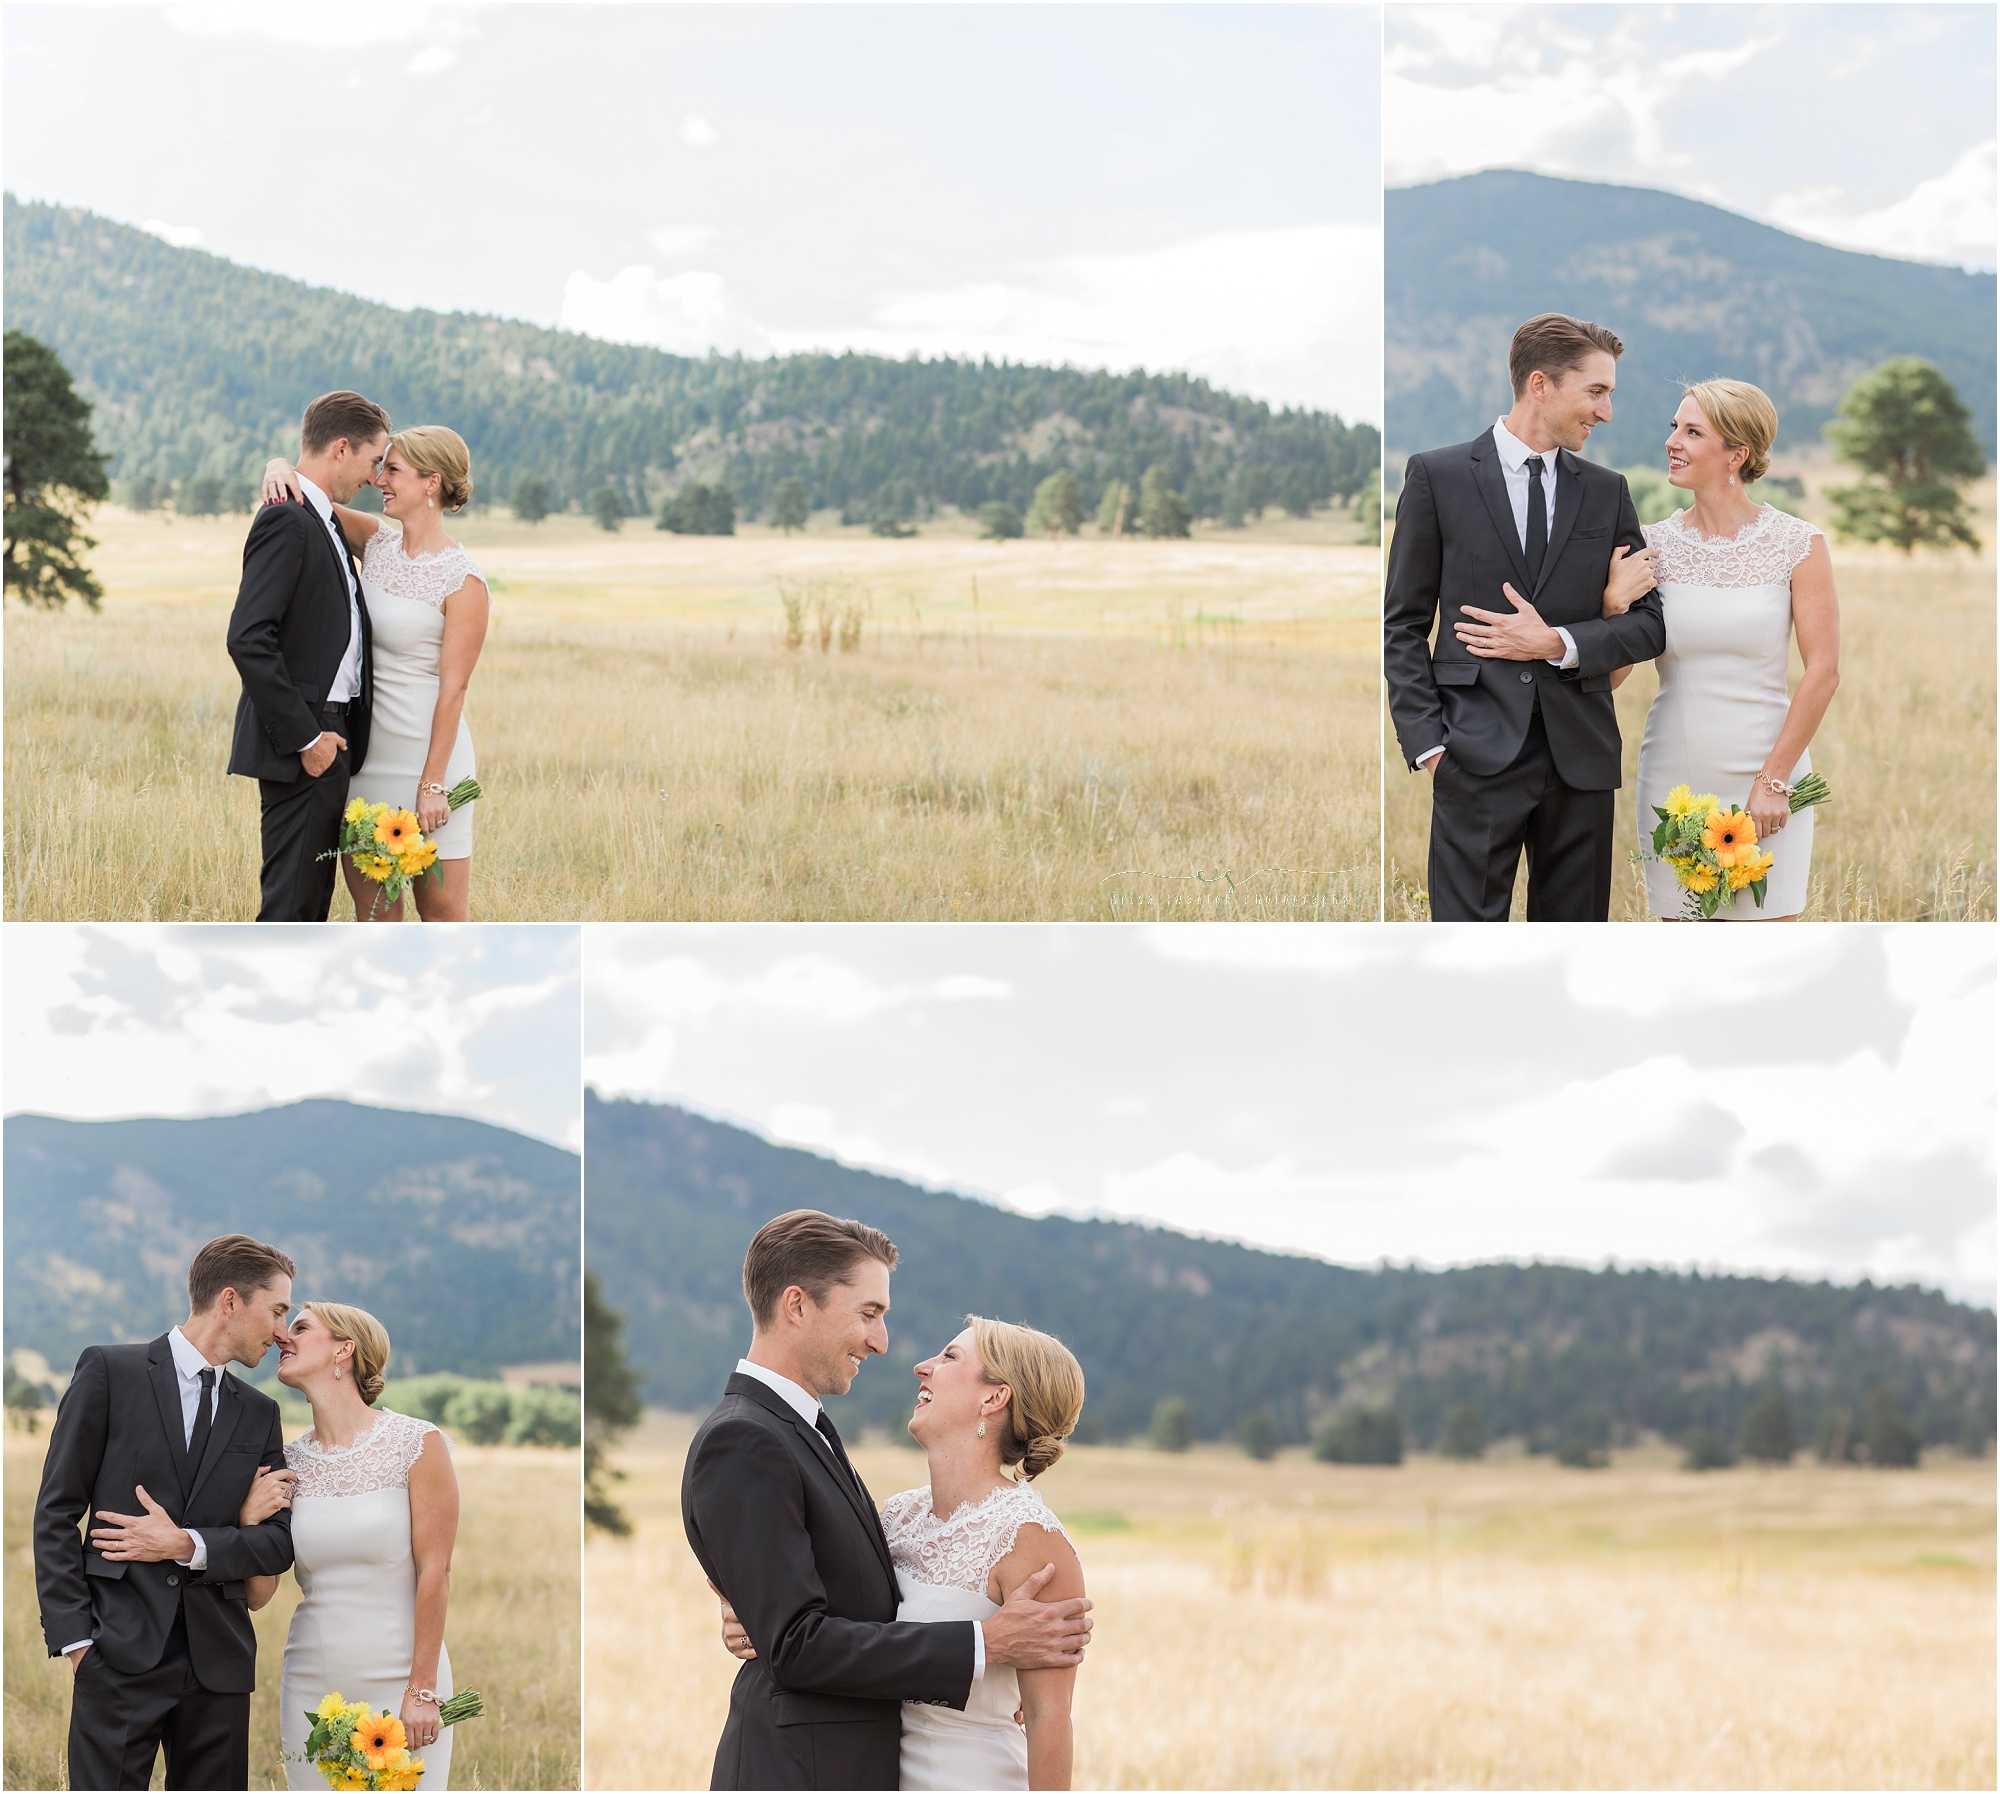 A beautiful evergreen co mountain wedding styled photo shoot by Erica Swantek Photography.